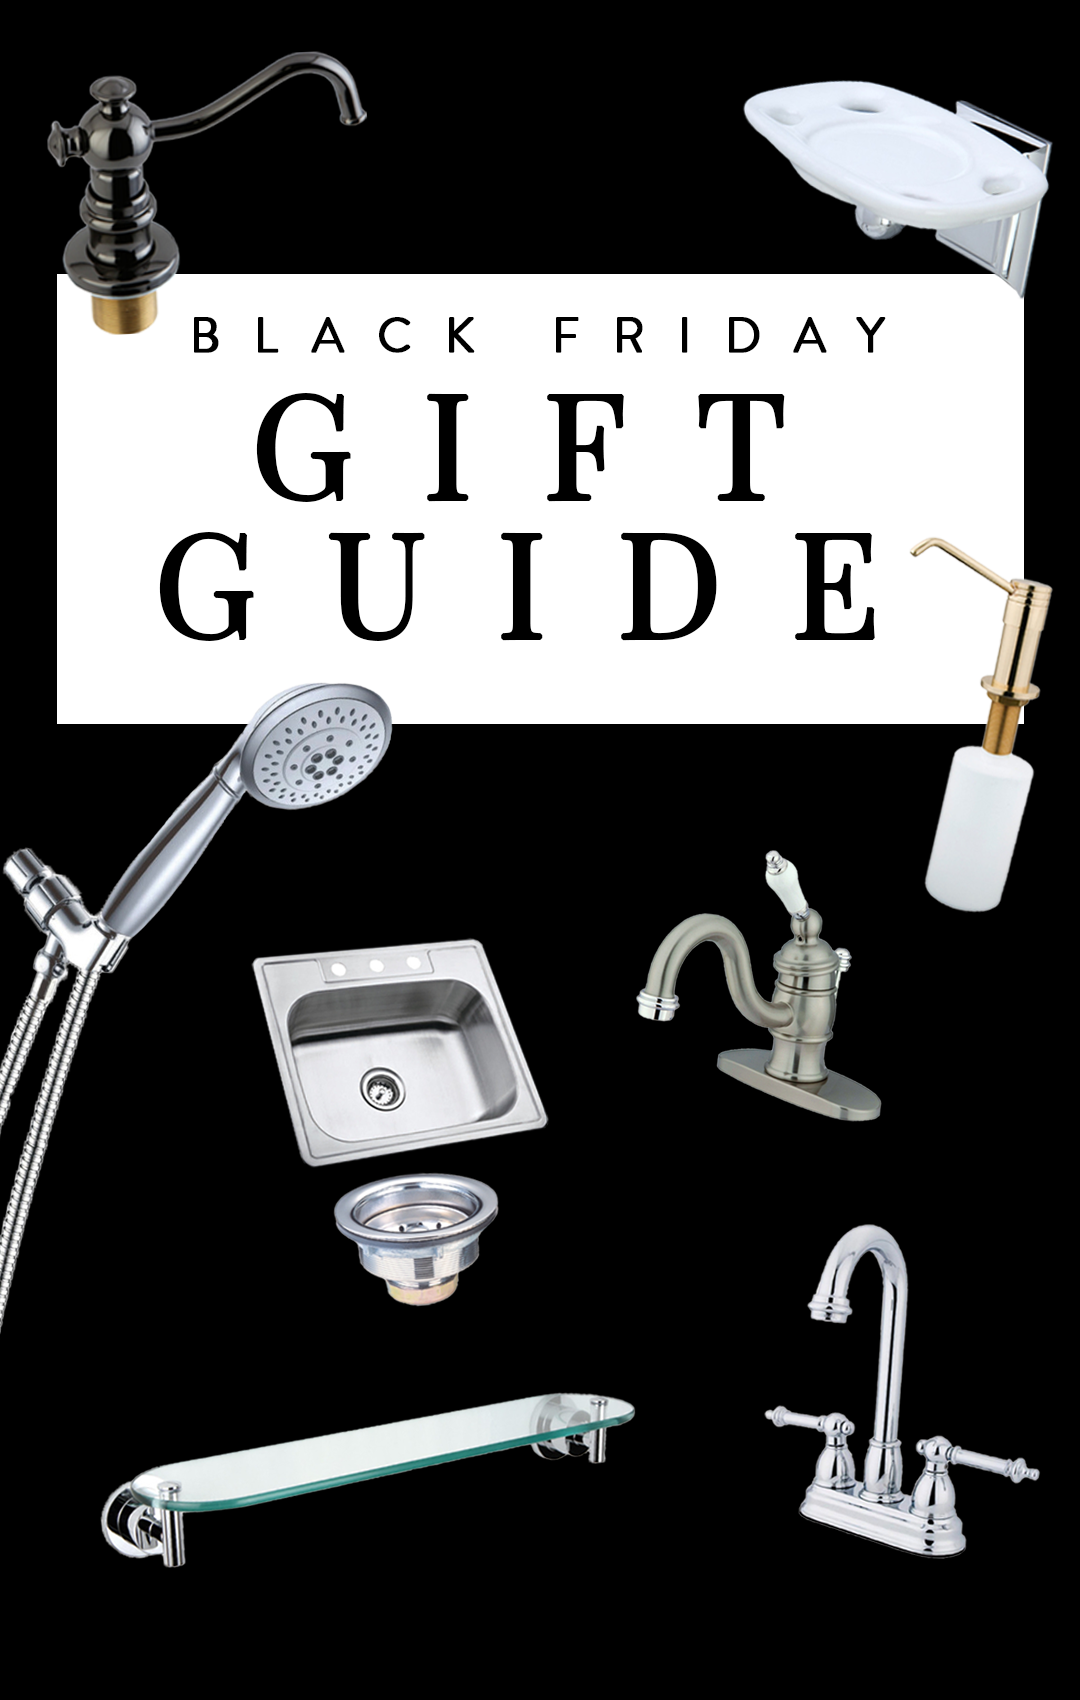 Black Friday Holiday Sales Gift Guide